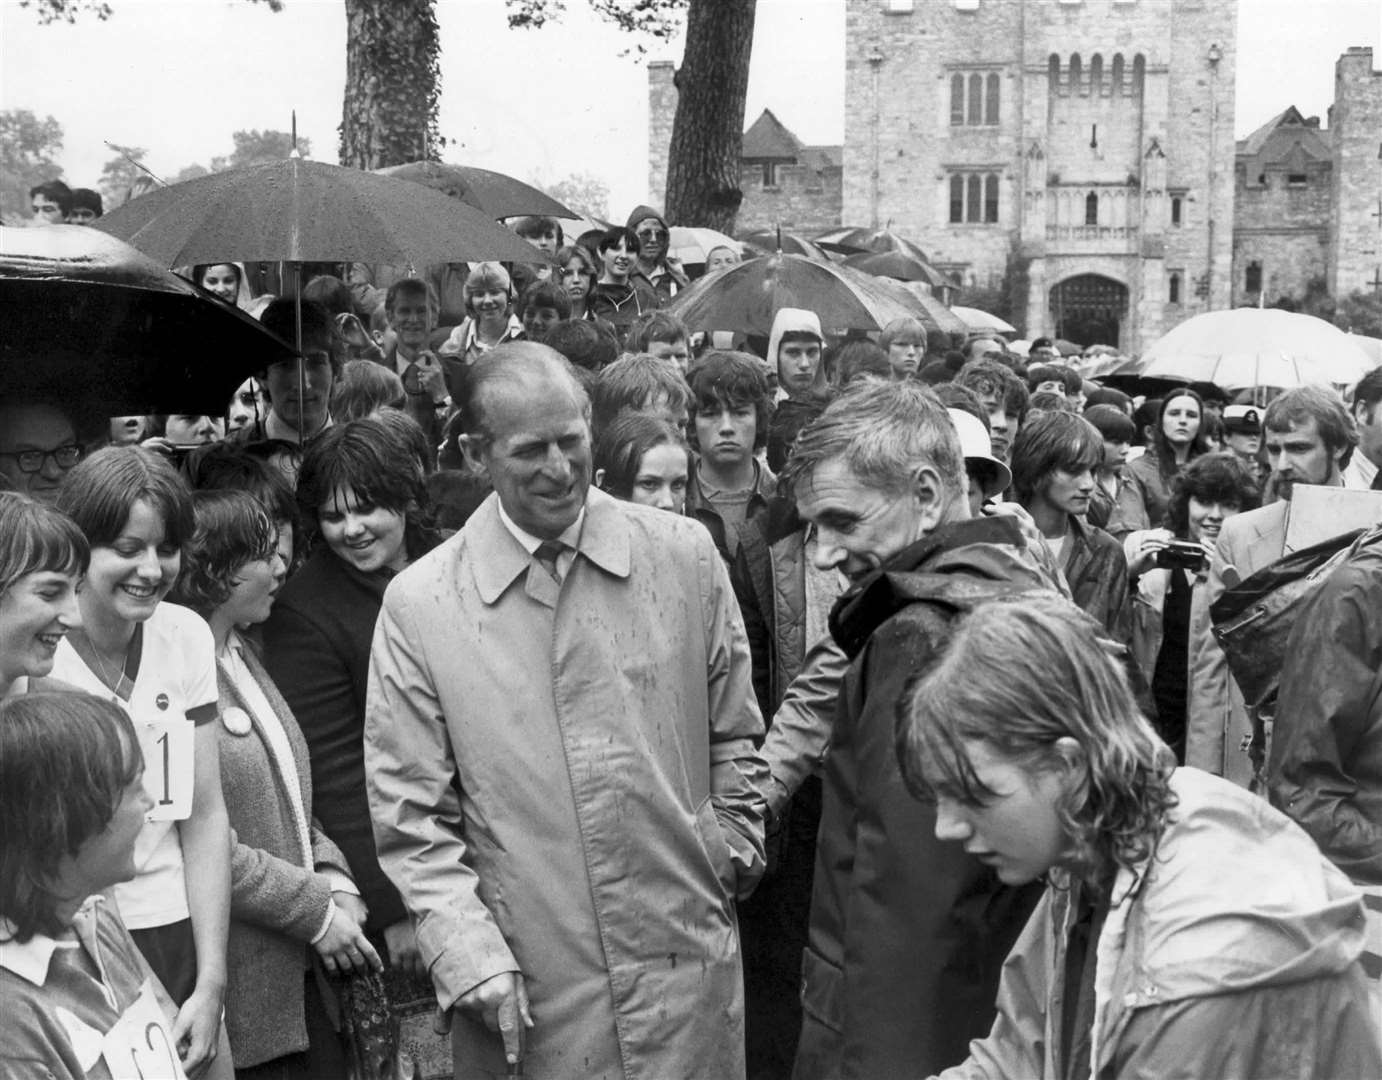 Crowds flocked to see the Duke at Hever